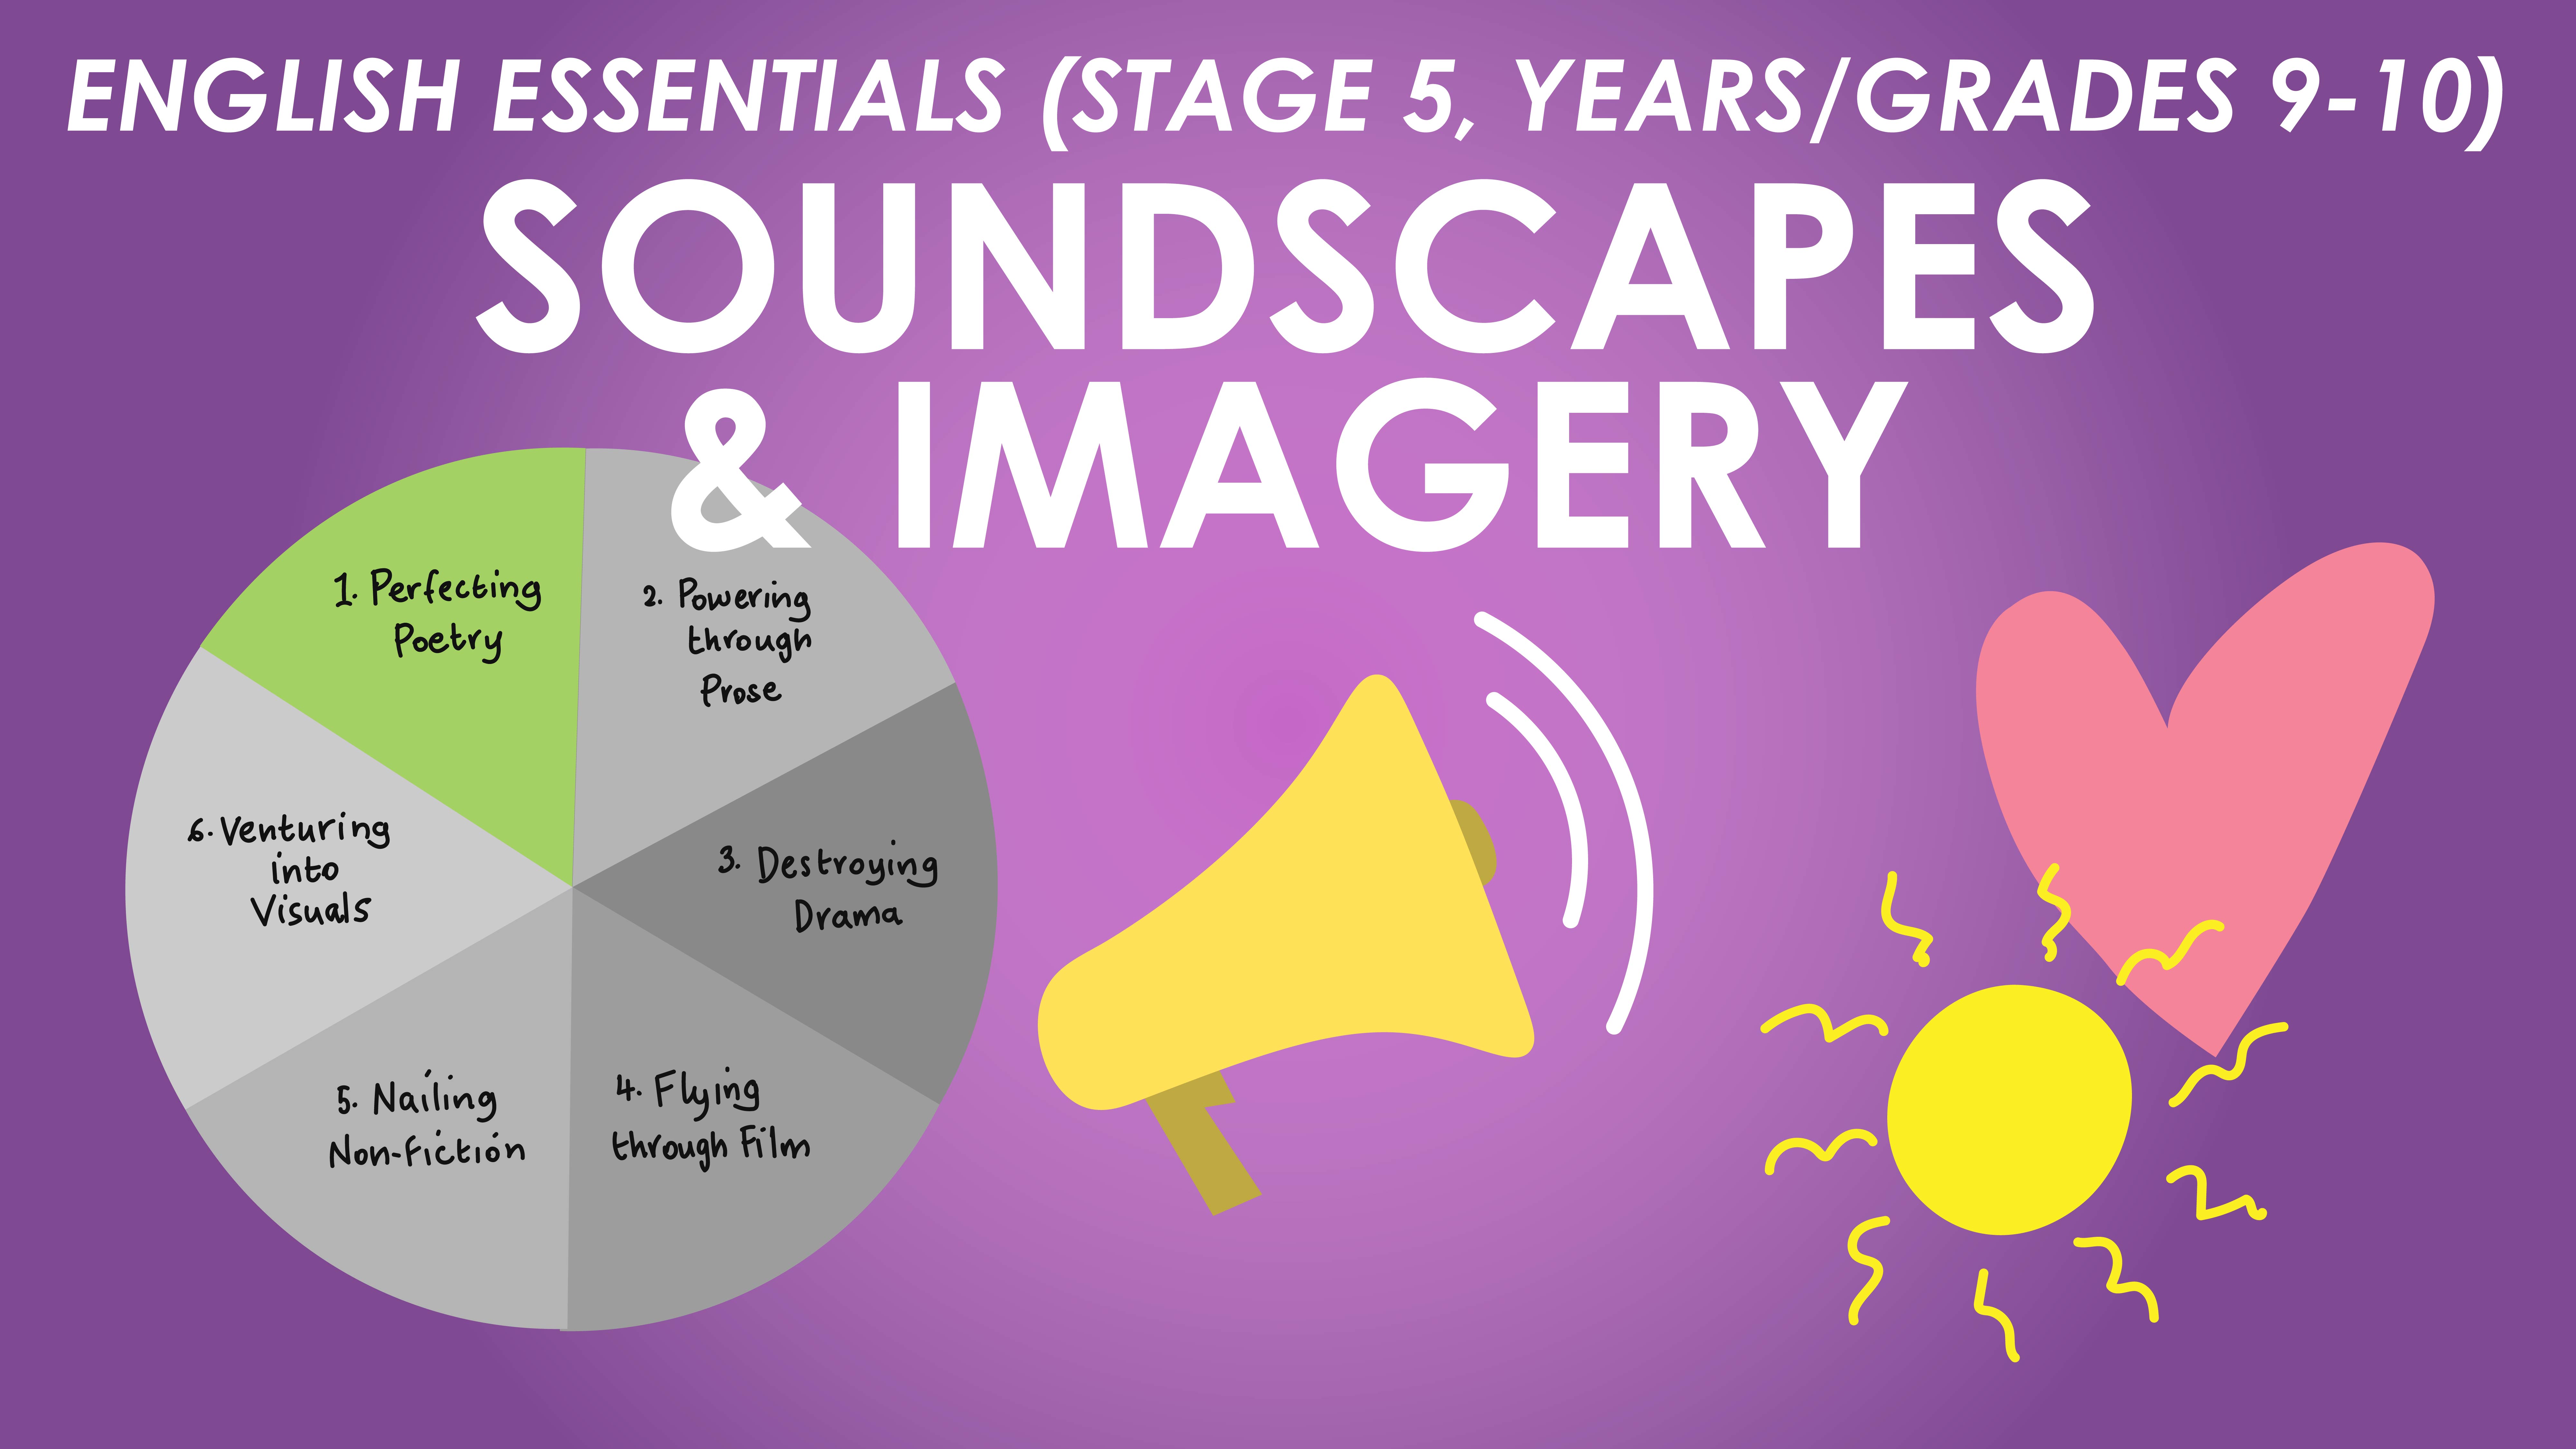 English Essentials - Perfecting Poetry - Soundscapes and Imagery (Stage 5, Years/Grades 9-10)